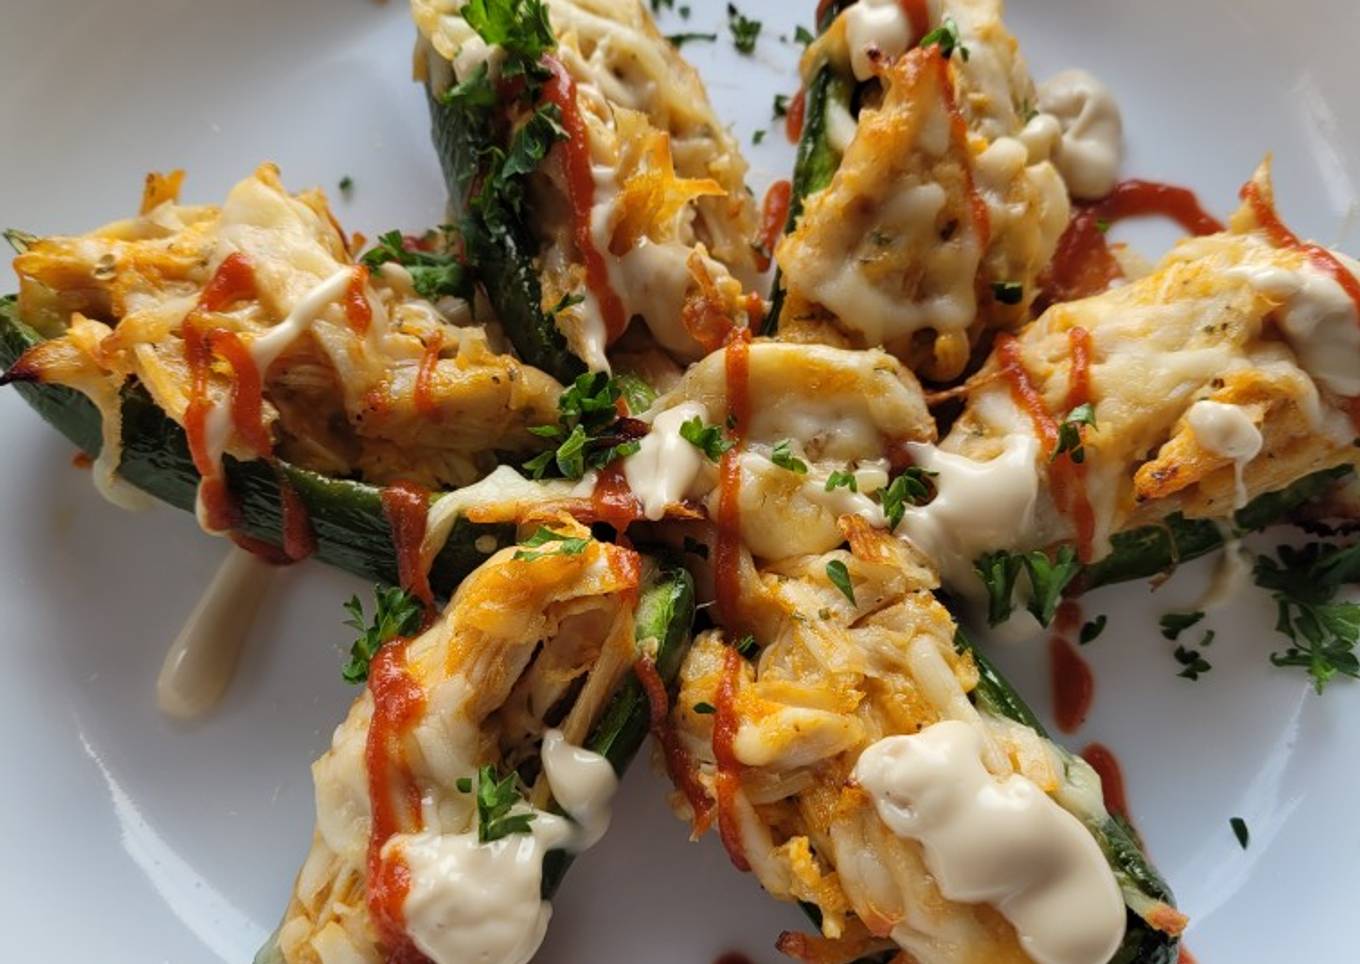 Chicken Poppers with an Asian twist